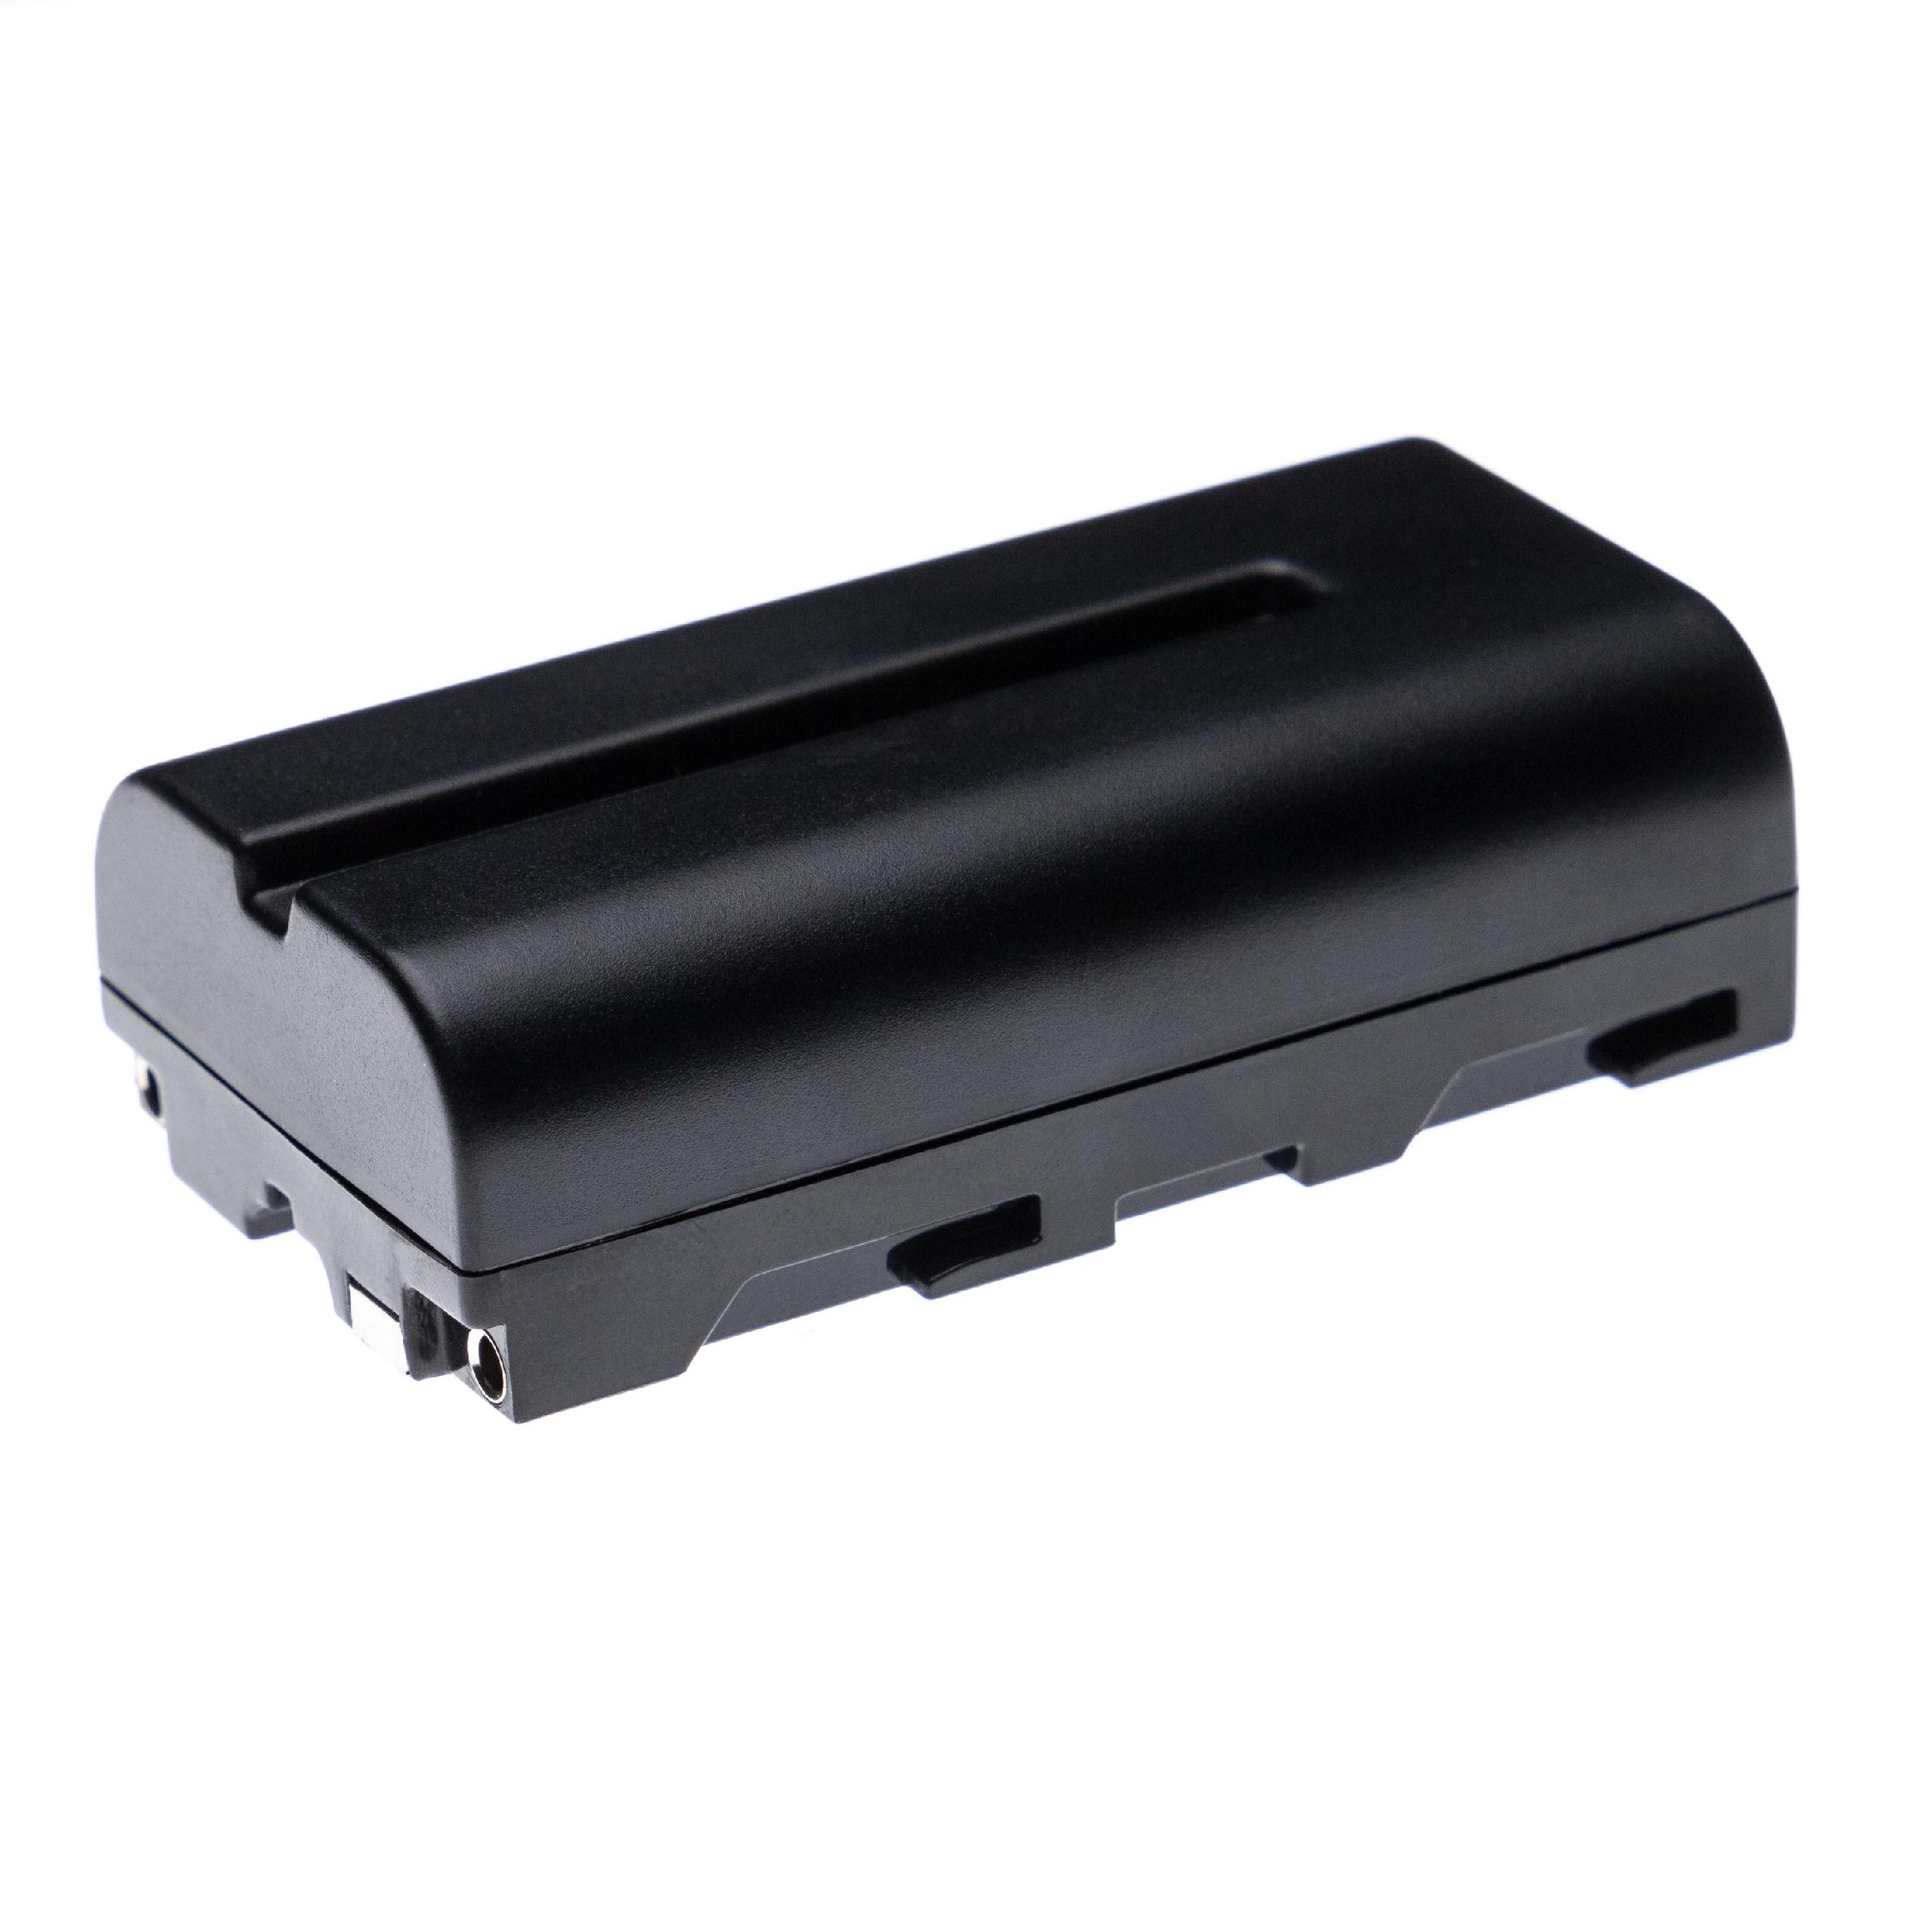 Electric Guitar Battery Replacement for Line 6 BA12, 98-034-0003 - 2600mAh 7.4V Li-ion